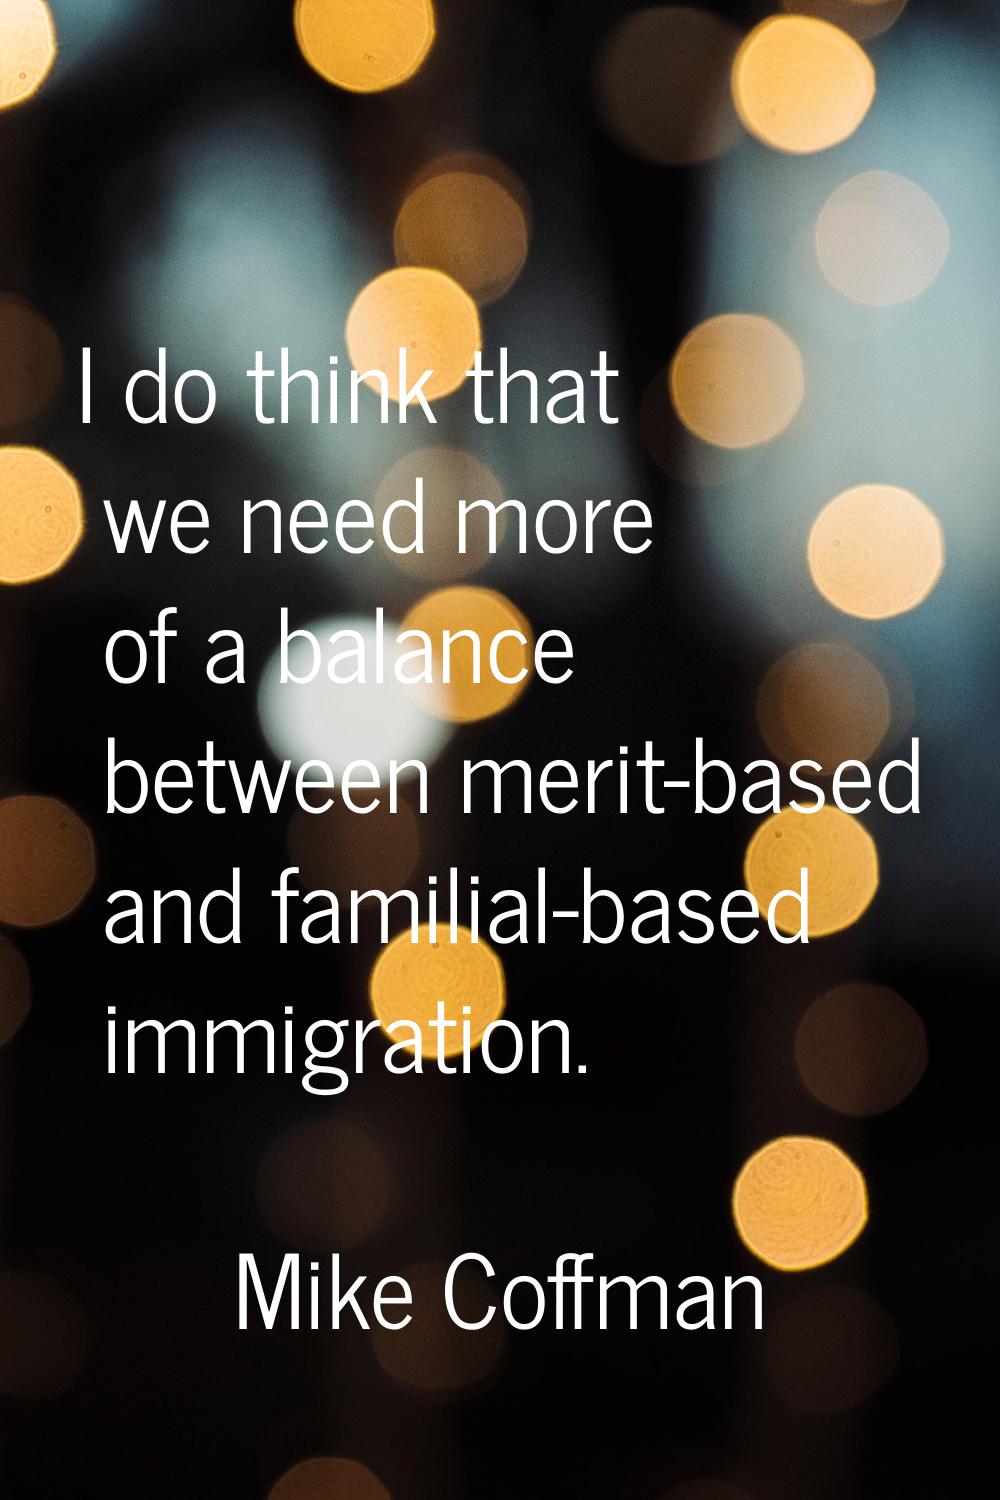 I do think that we need more of a balance between merit-based and familial-based immigration.